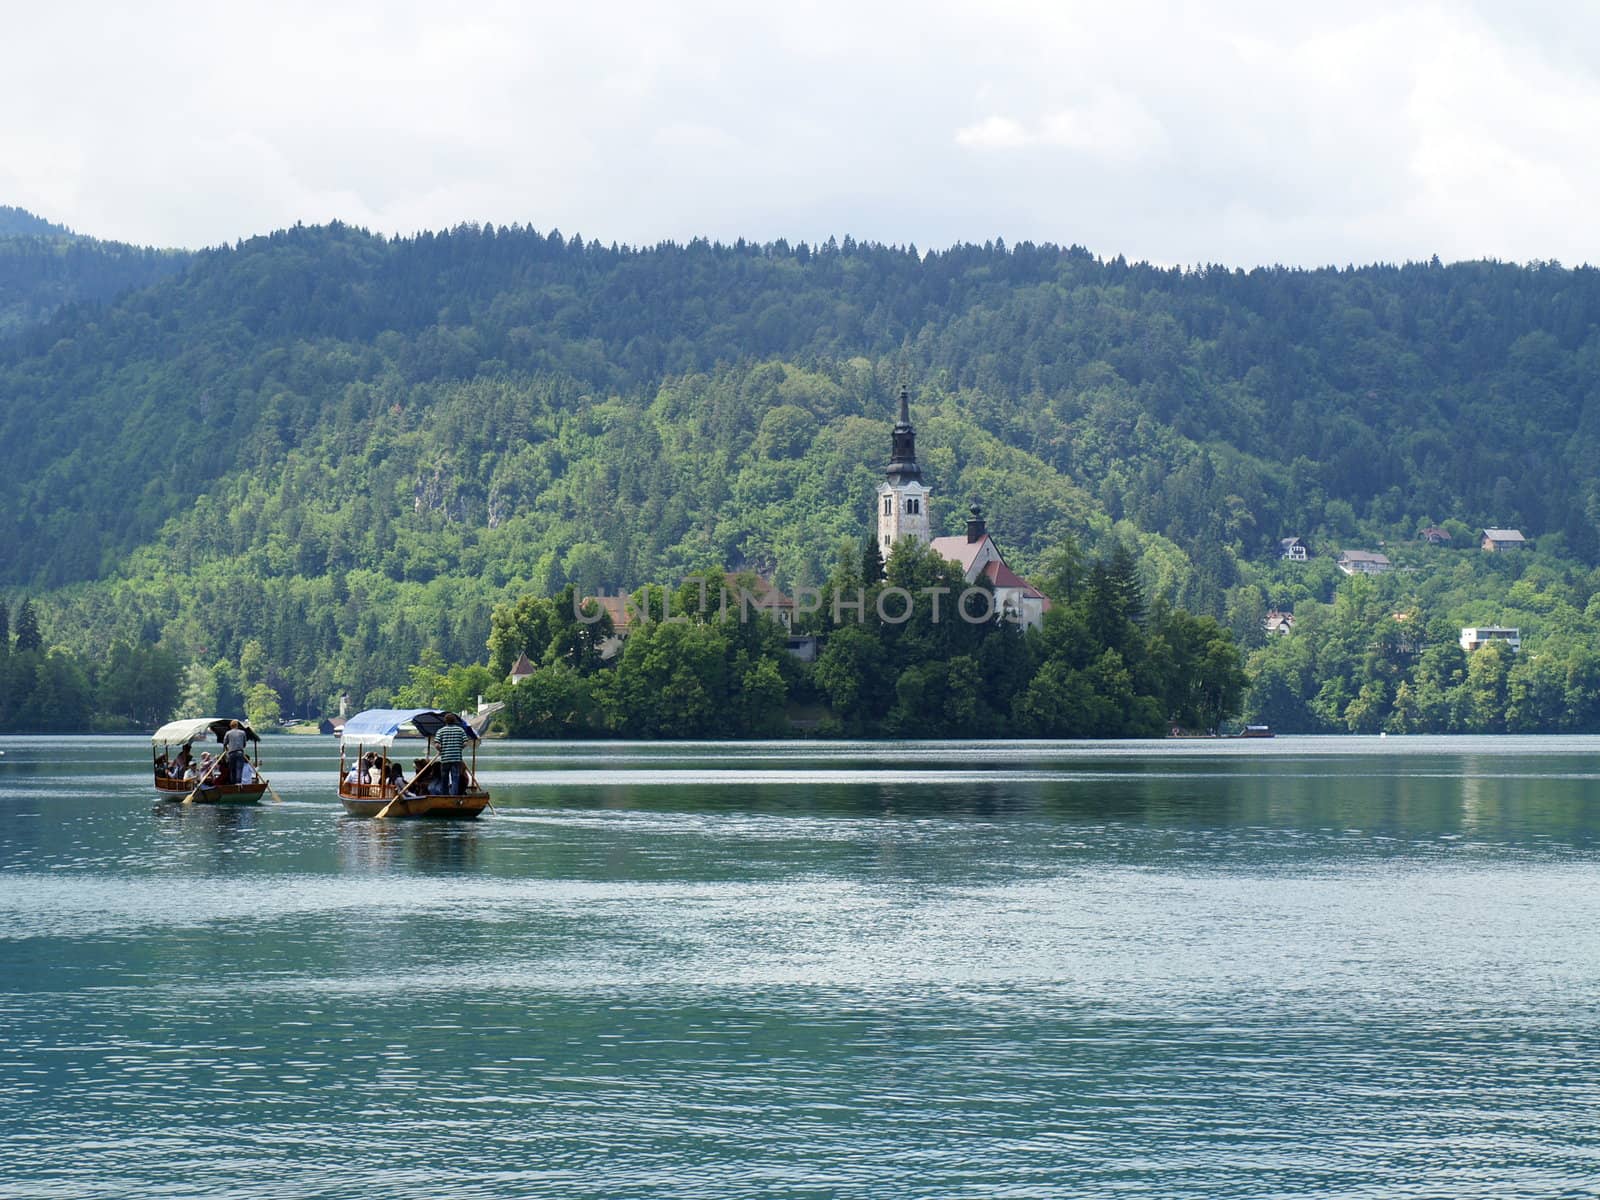 Church of Bled on an island by anderm